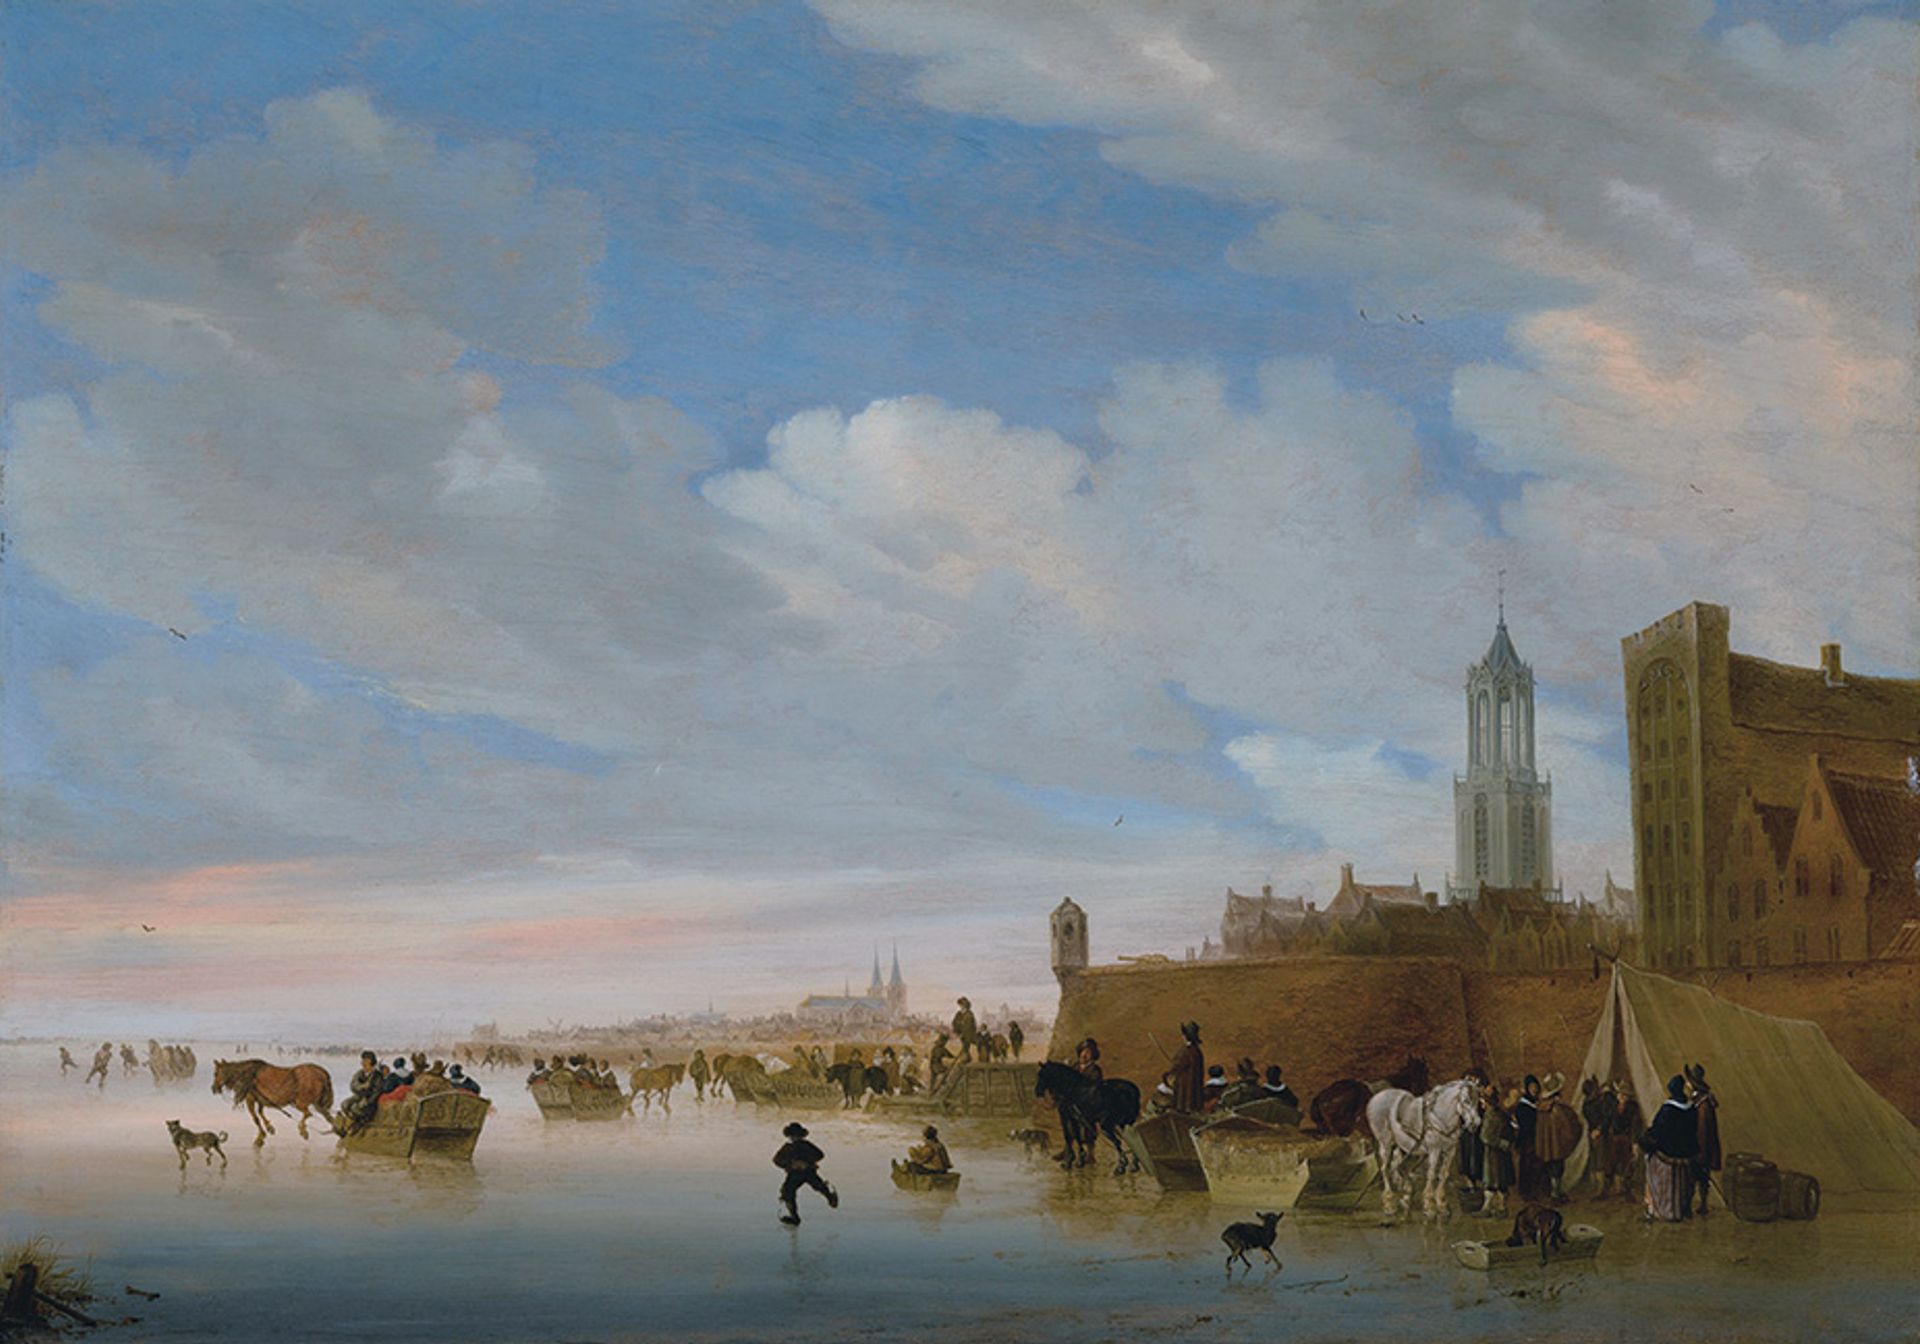 This winter lanscape by Salomon van Ruysdael was at the centre of a provenance dispute between Richard Green gallery and a client Public Domain Wiki